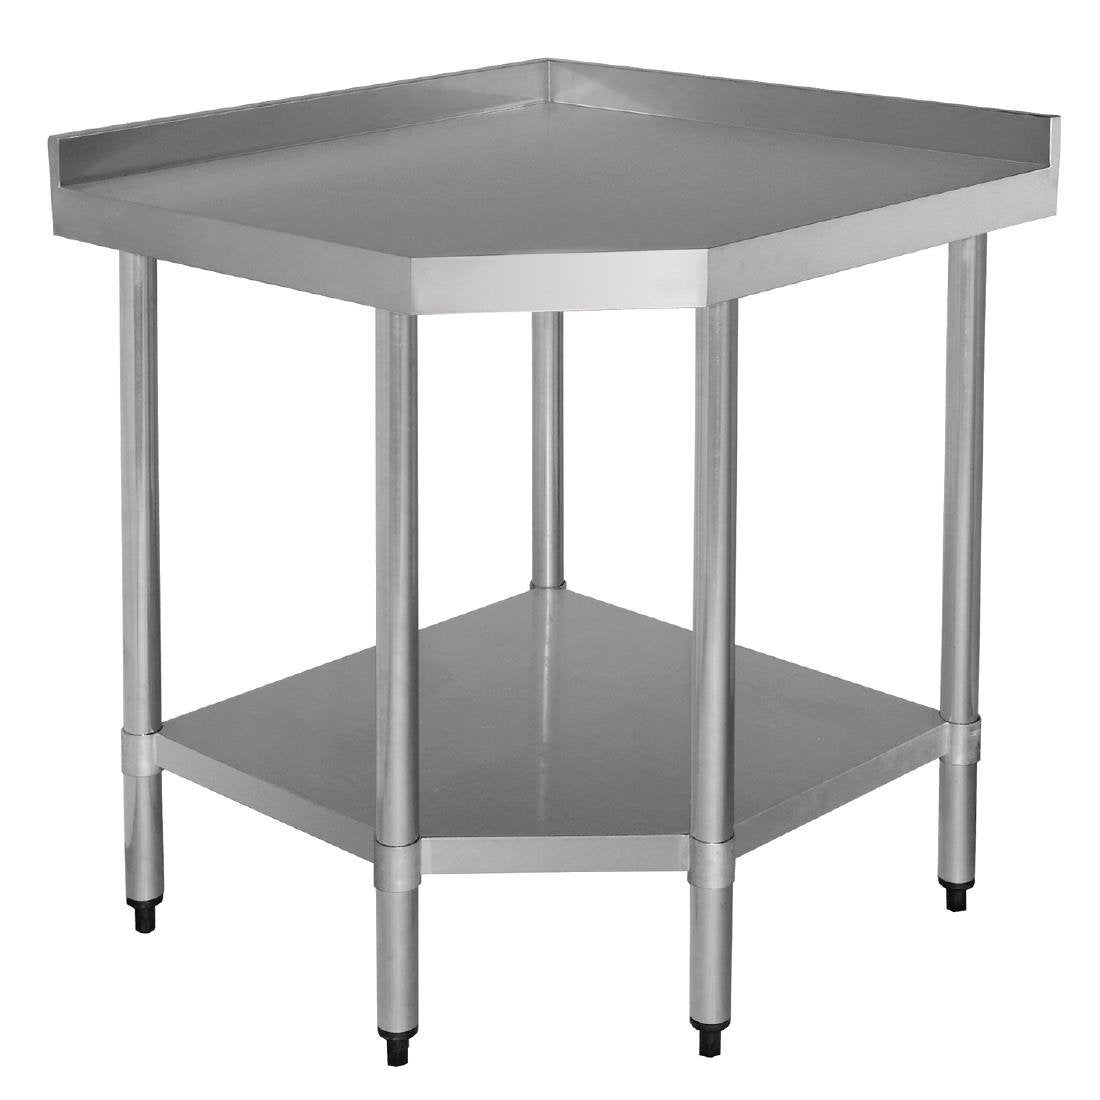 Vogue Stainless Steel Corner Table 600mm CB907 Prep Benches